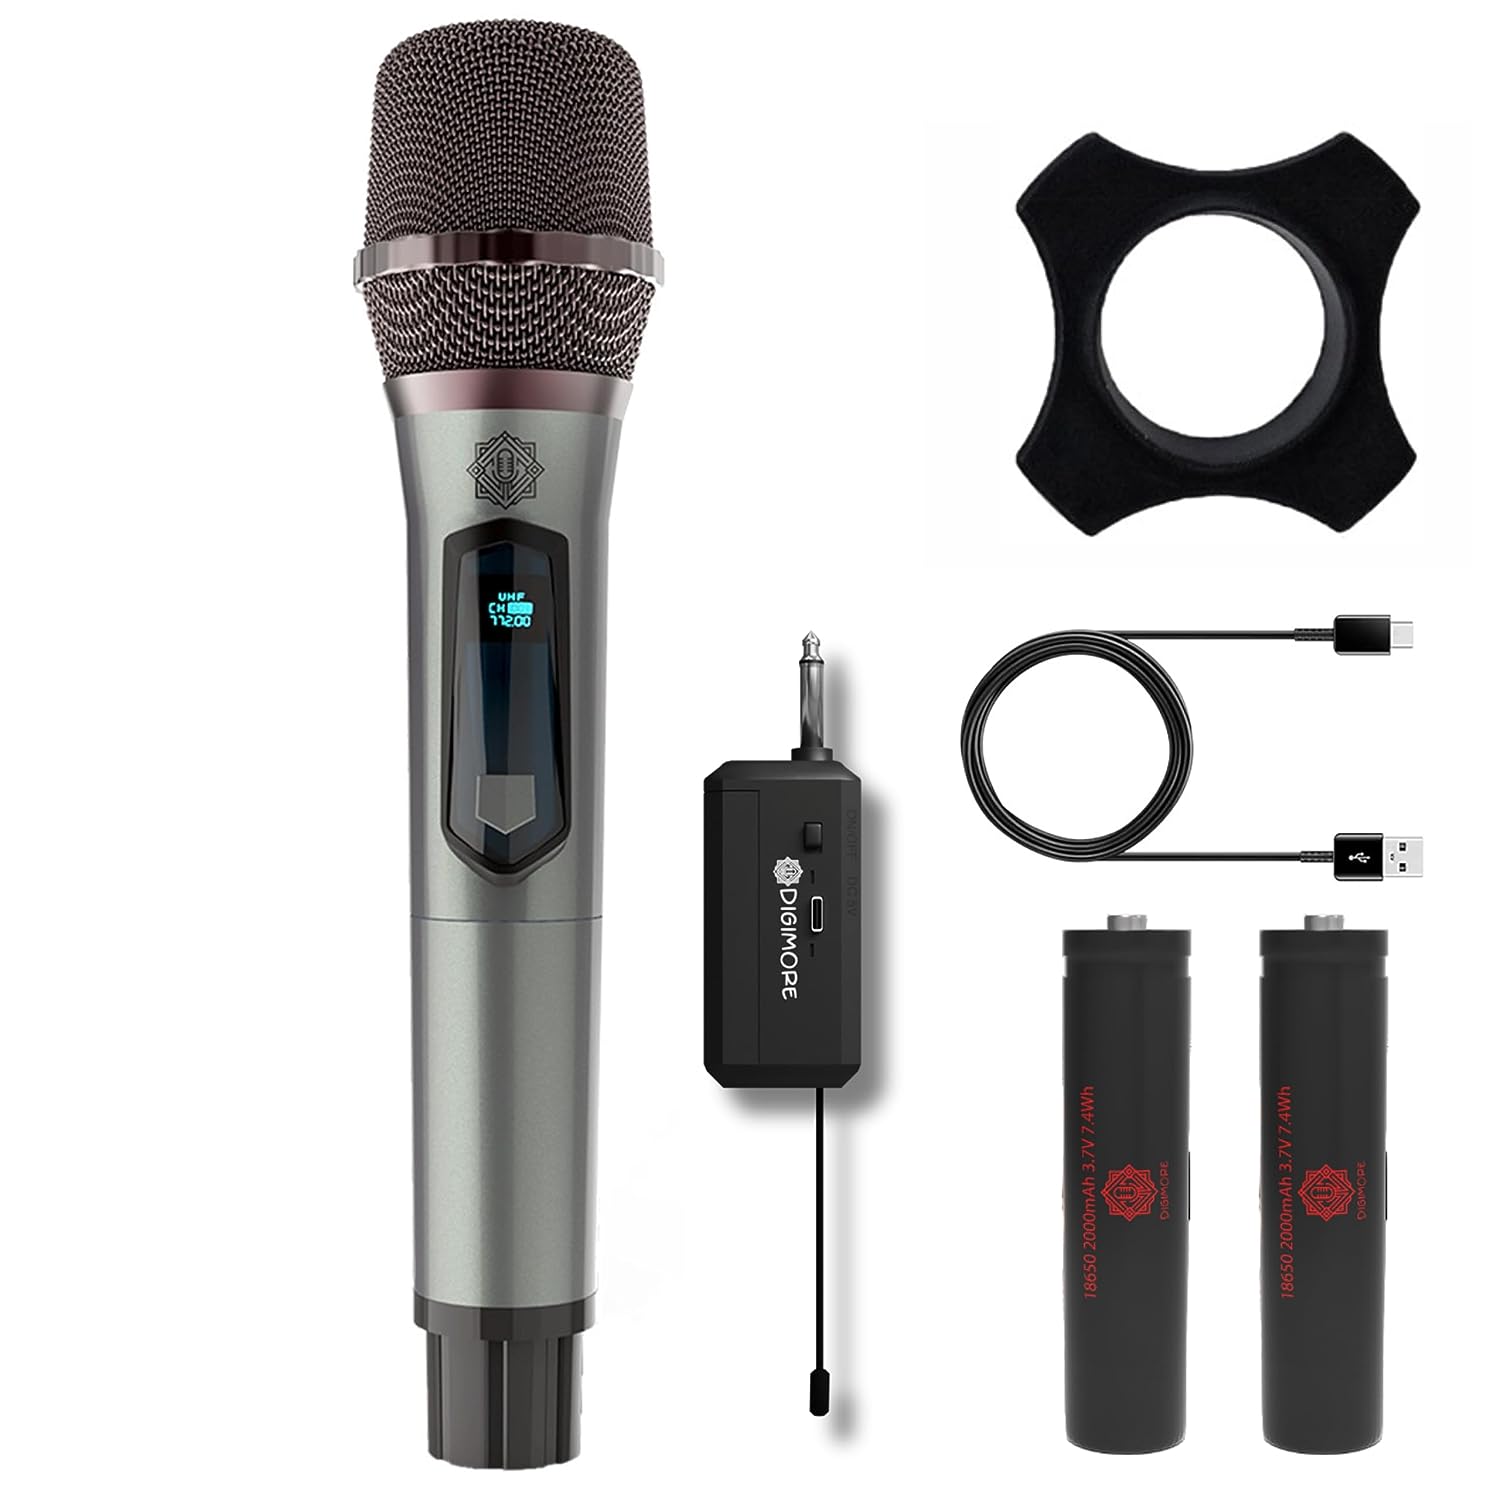 D-320 Wireless Microphone System, True Diversity Dual Cordless Microphone  Set, Professional UHF Handheld Wireless Microphones w/Auto Scan, 2x200